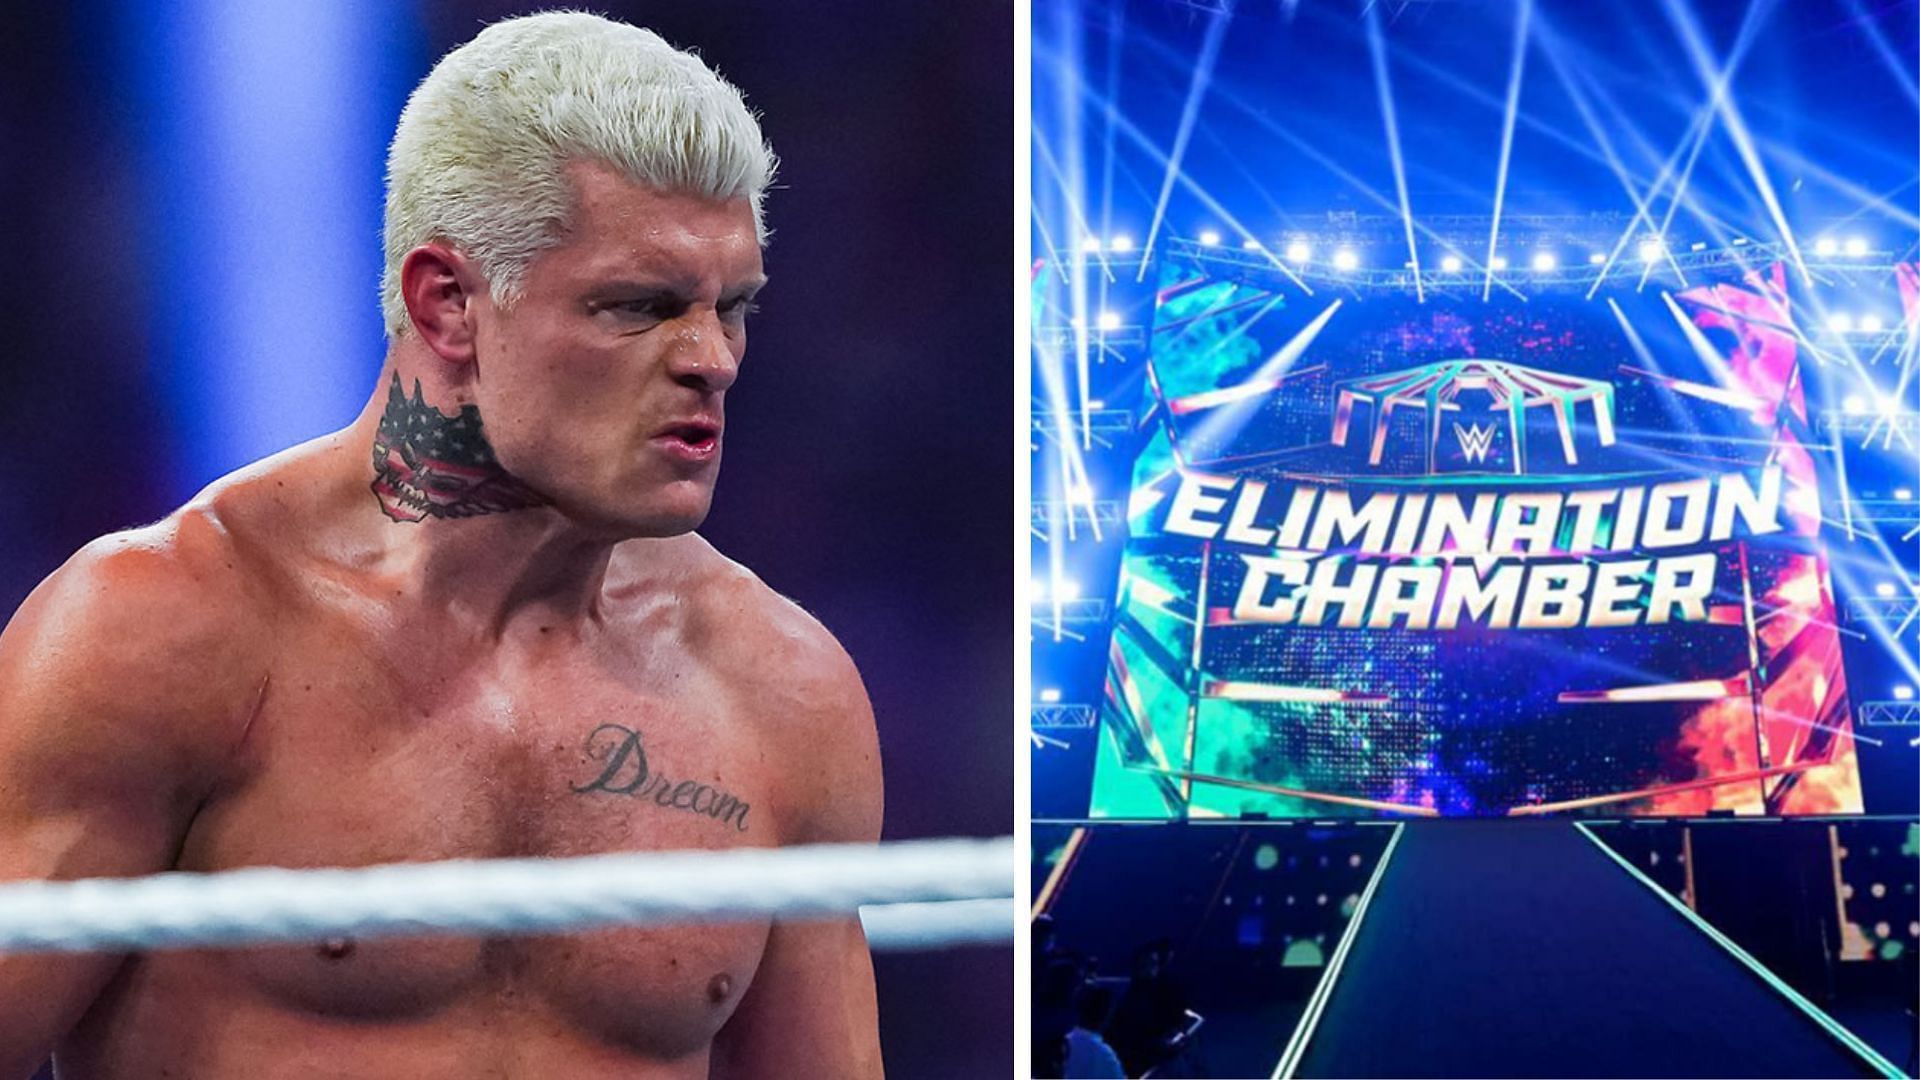 Cody Rhodes is set to face Roman Reigns at this year